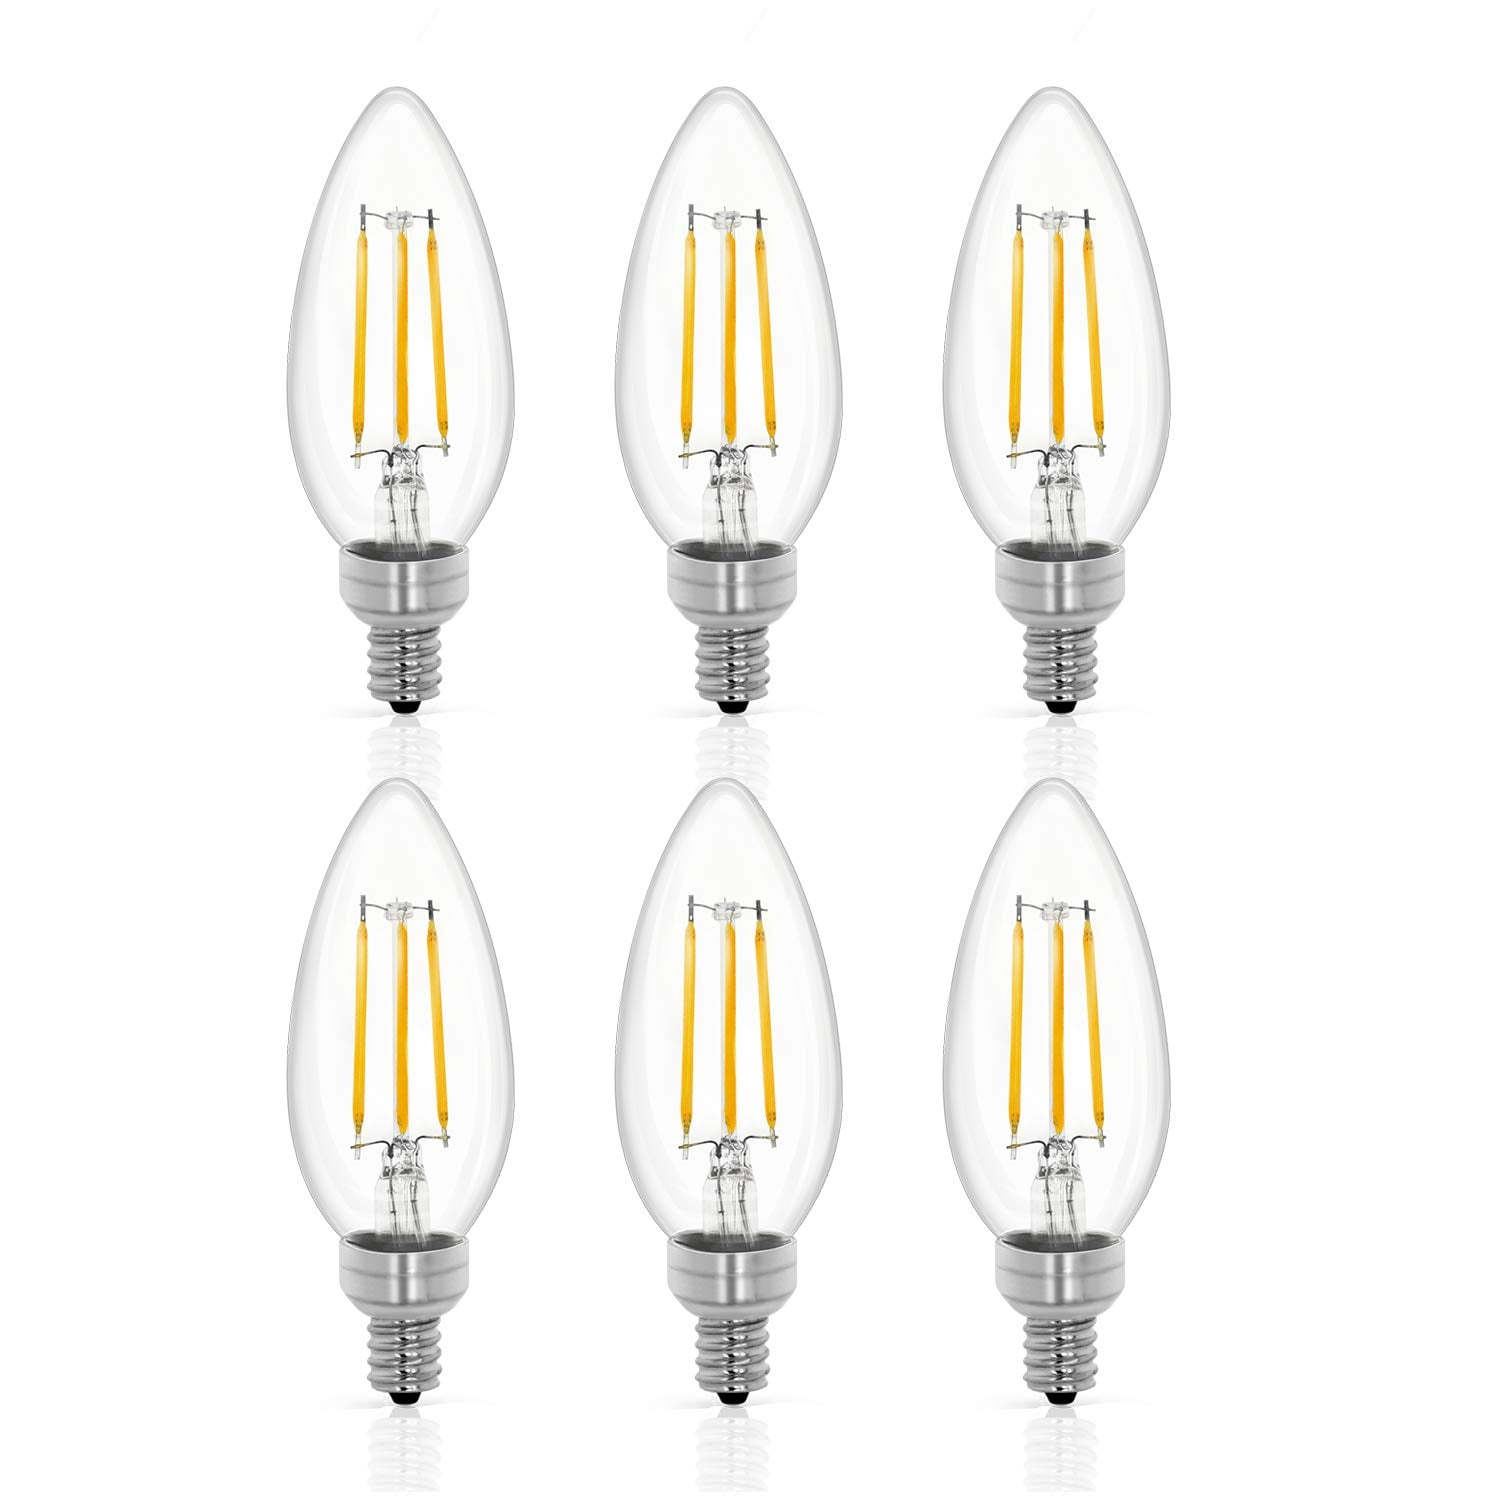 6 X 4W CANDLE LIGHT BULBS LED LAMPS WARM WHITE DAY LIGHT CHANDELIER BULBS 